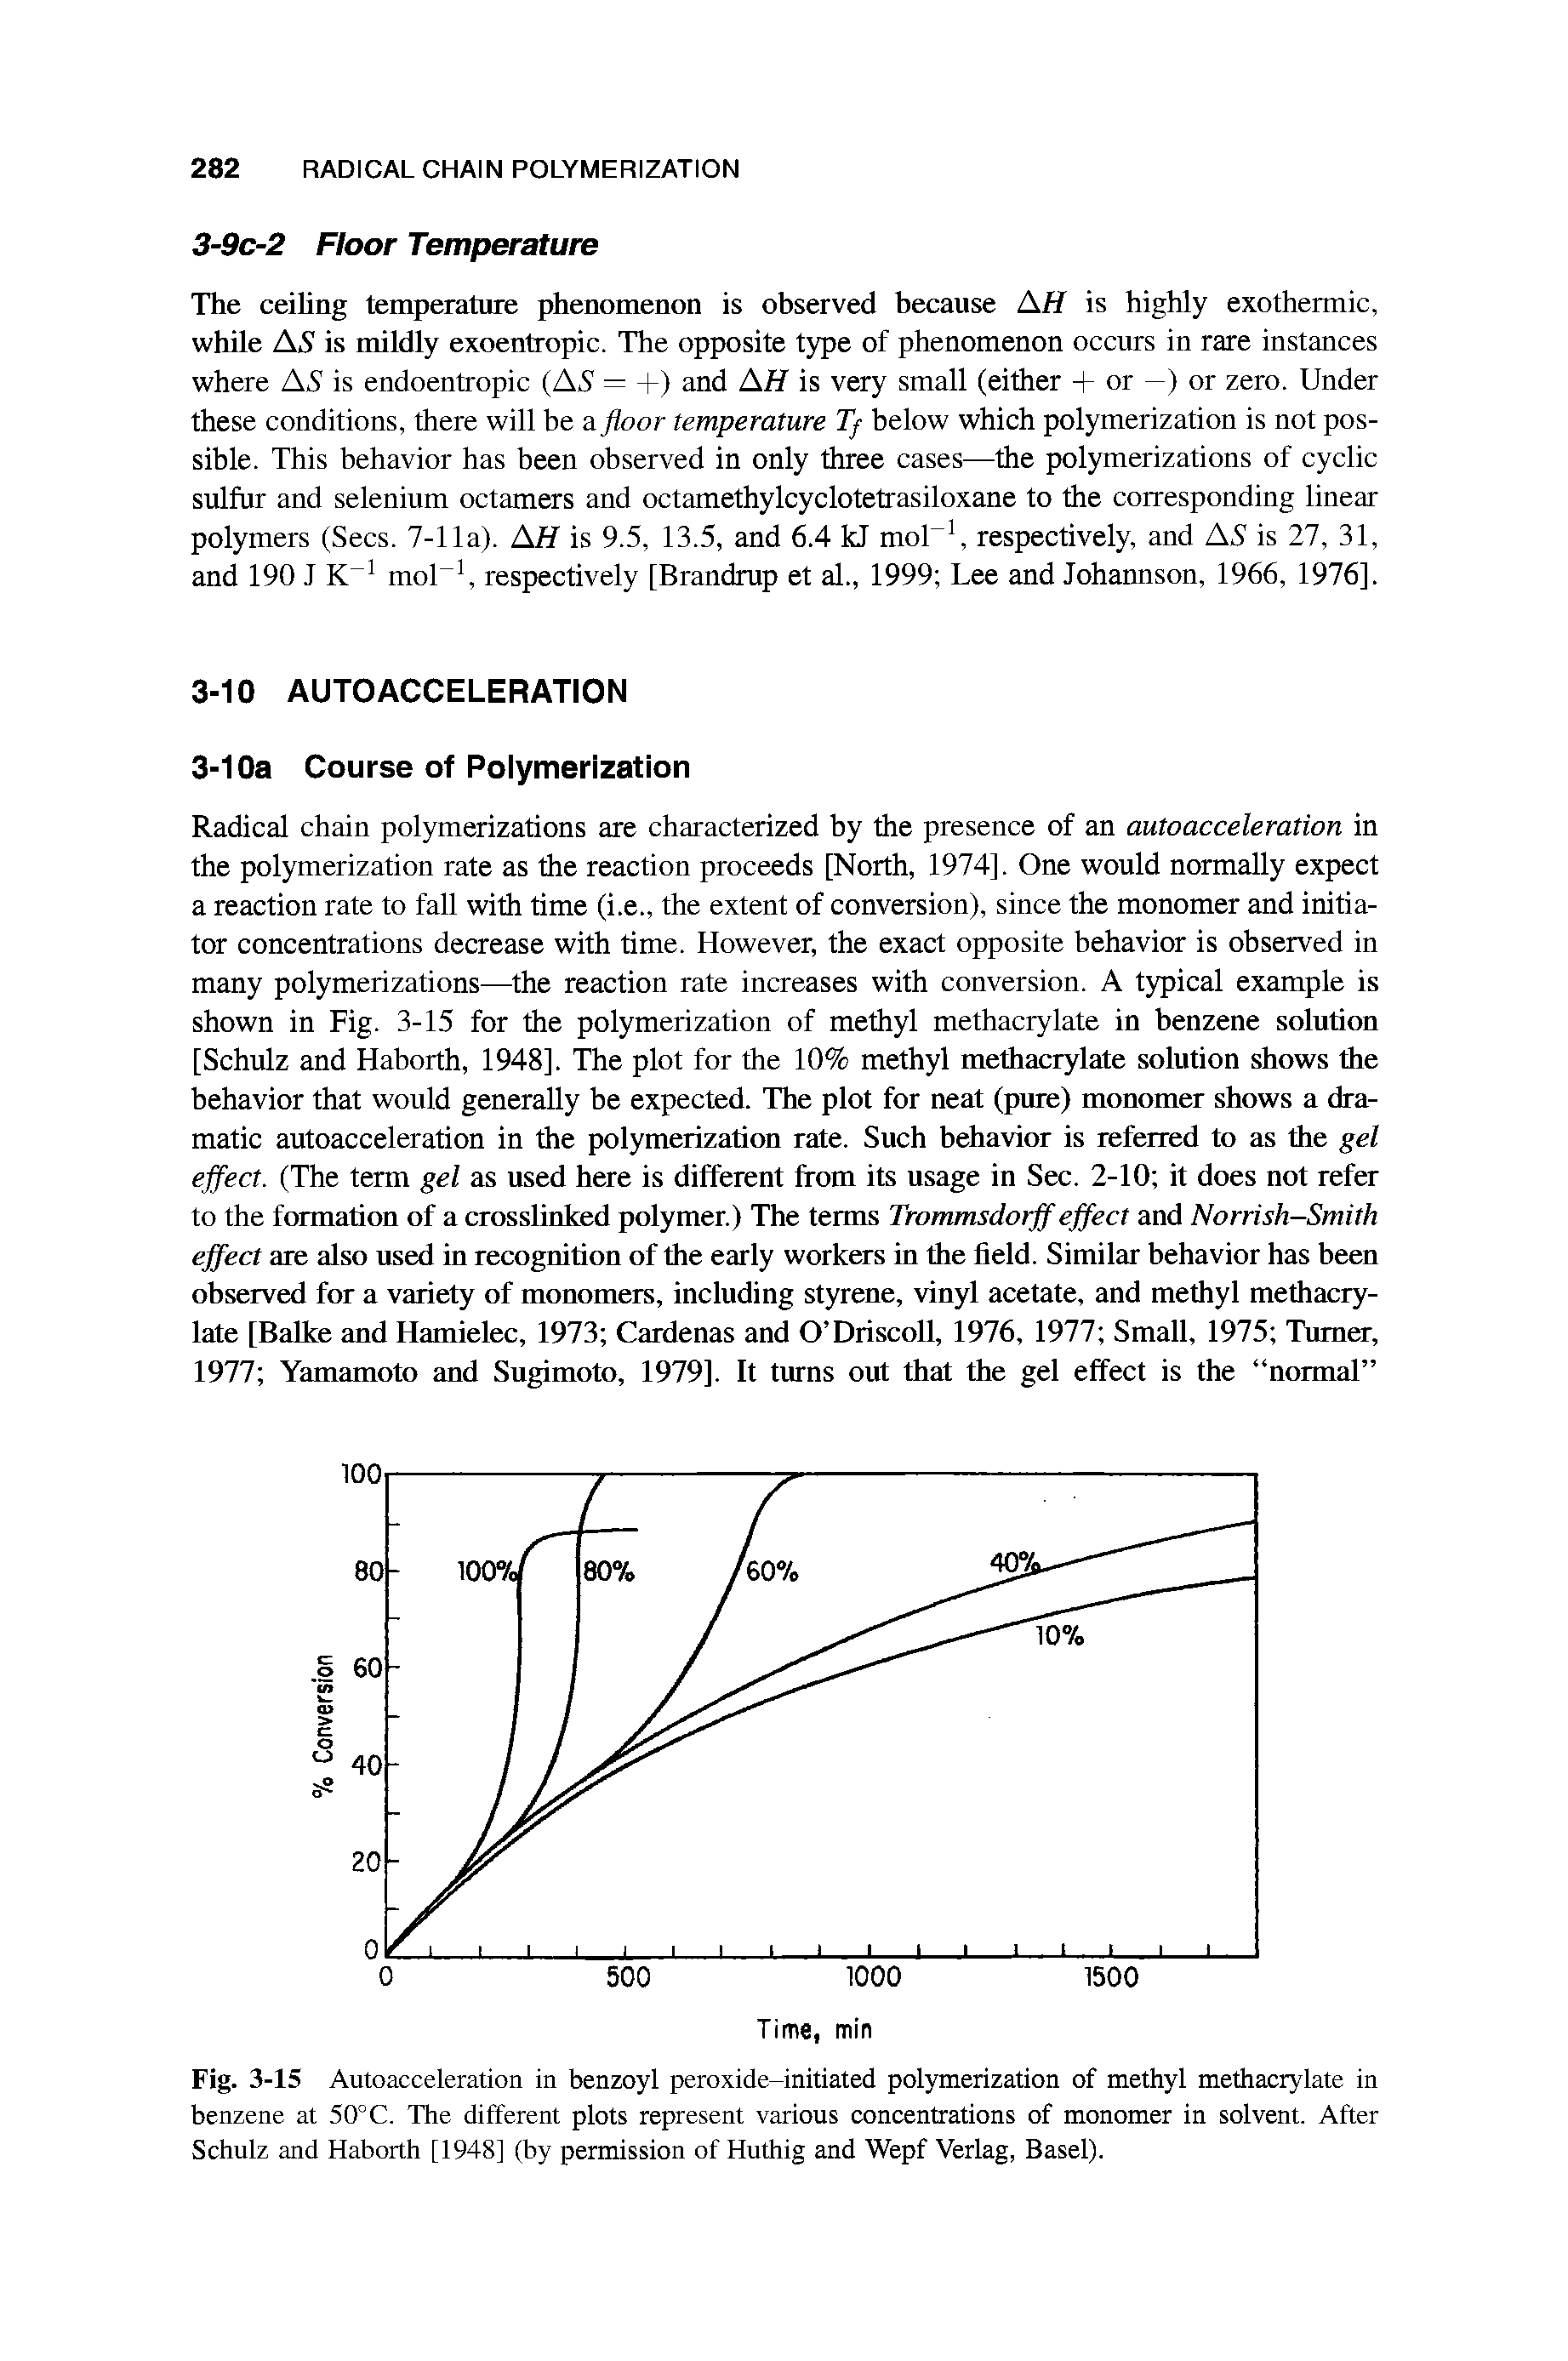 Fig. 3-15 Autoacceleration in benzoyl peroxide-initiated polymerization of methyl methacrylate in benzene at 50°C. The different plots represent various concentrations of monomer in solvent. After Schulz and Haborth [1948] (by permission of Huthig and Wepf Verlag, Basel).